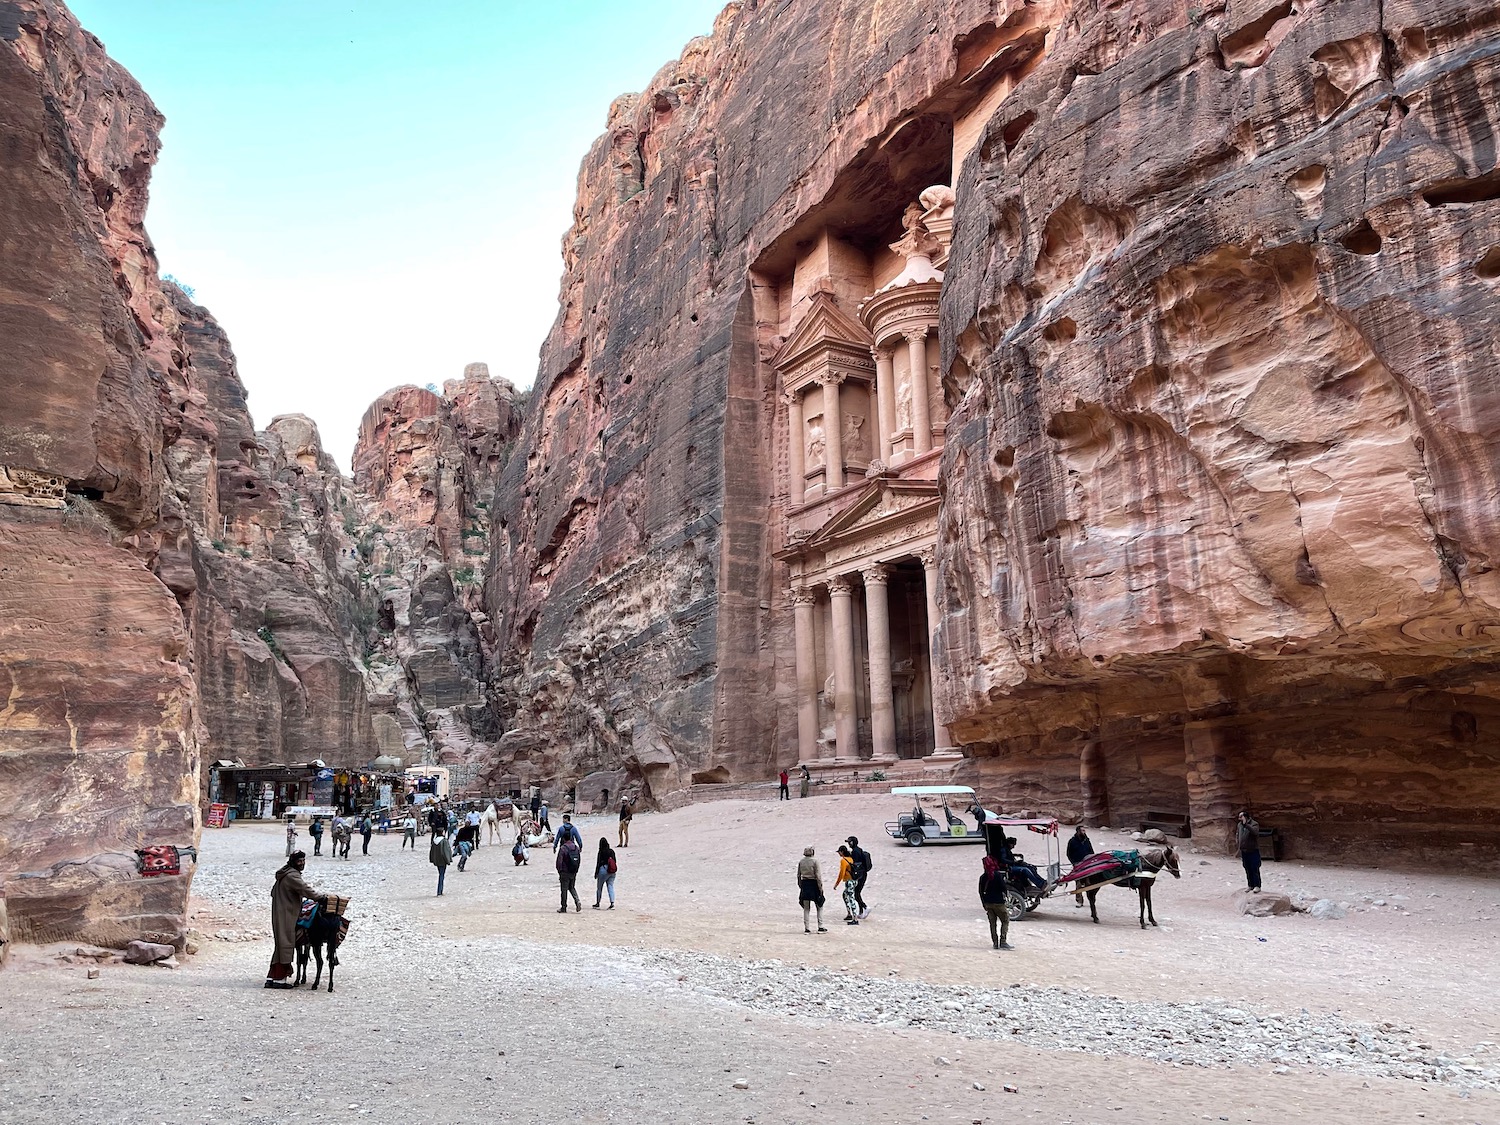 people walking in front of a rock formation with Petra in the background